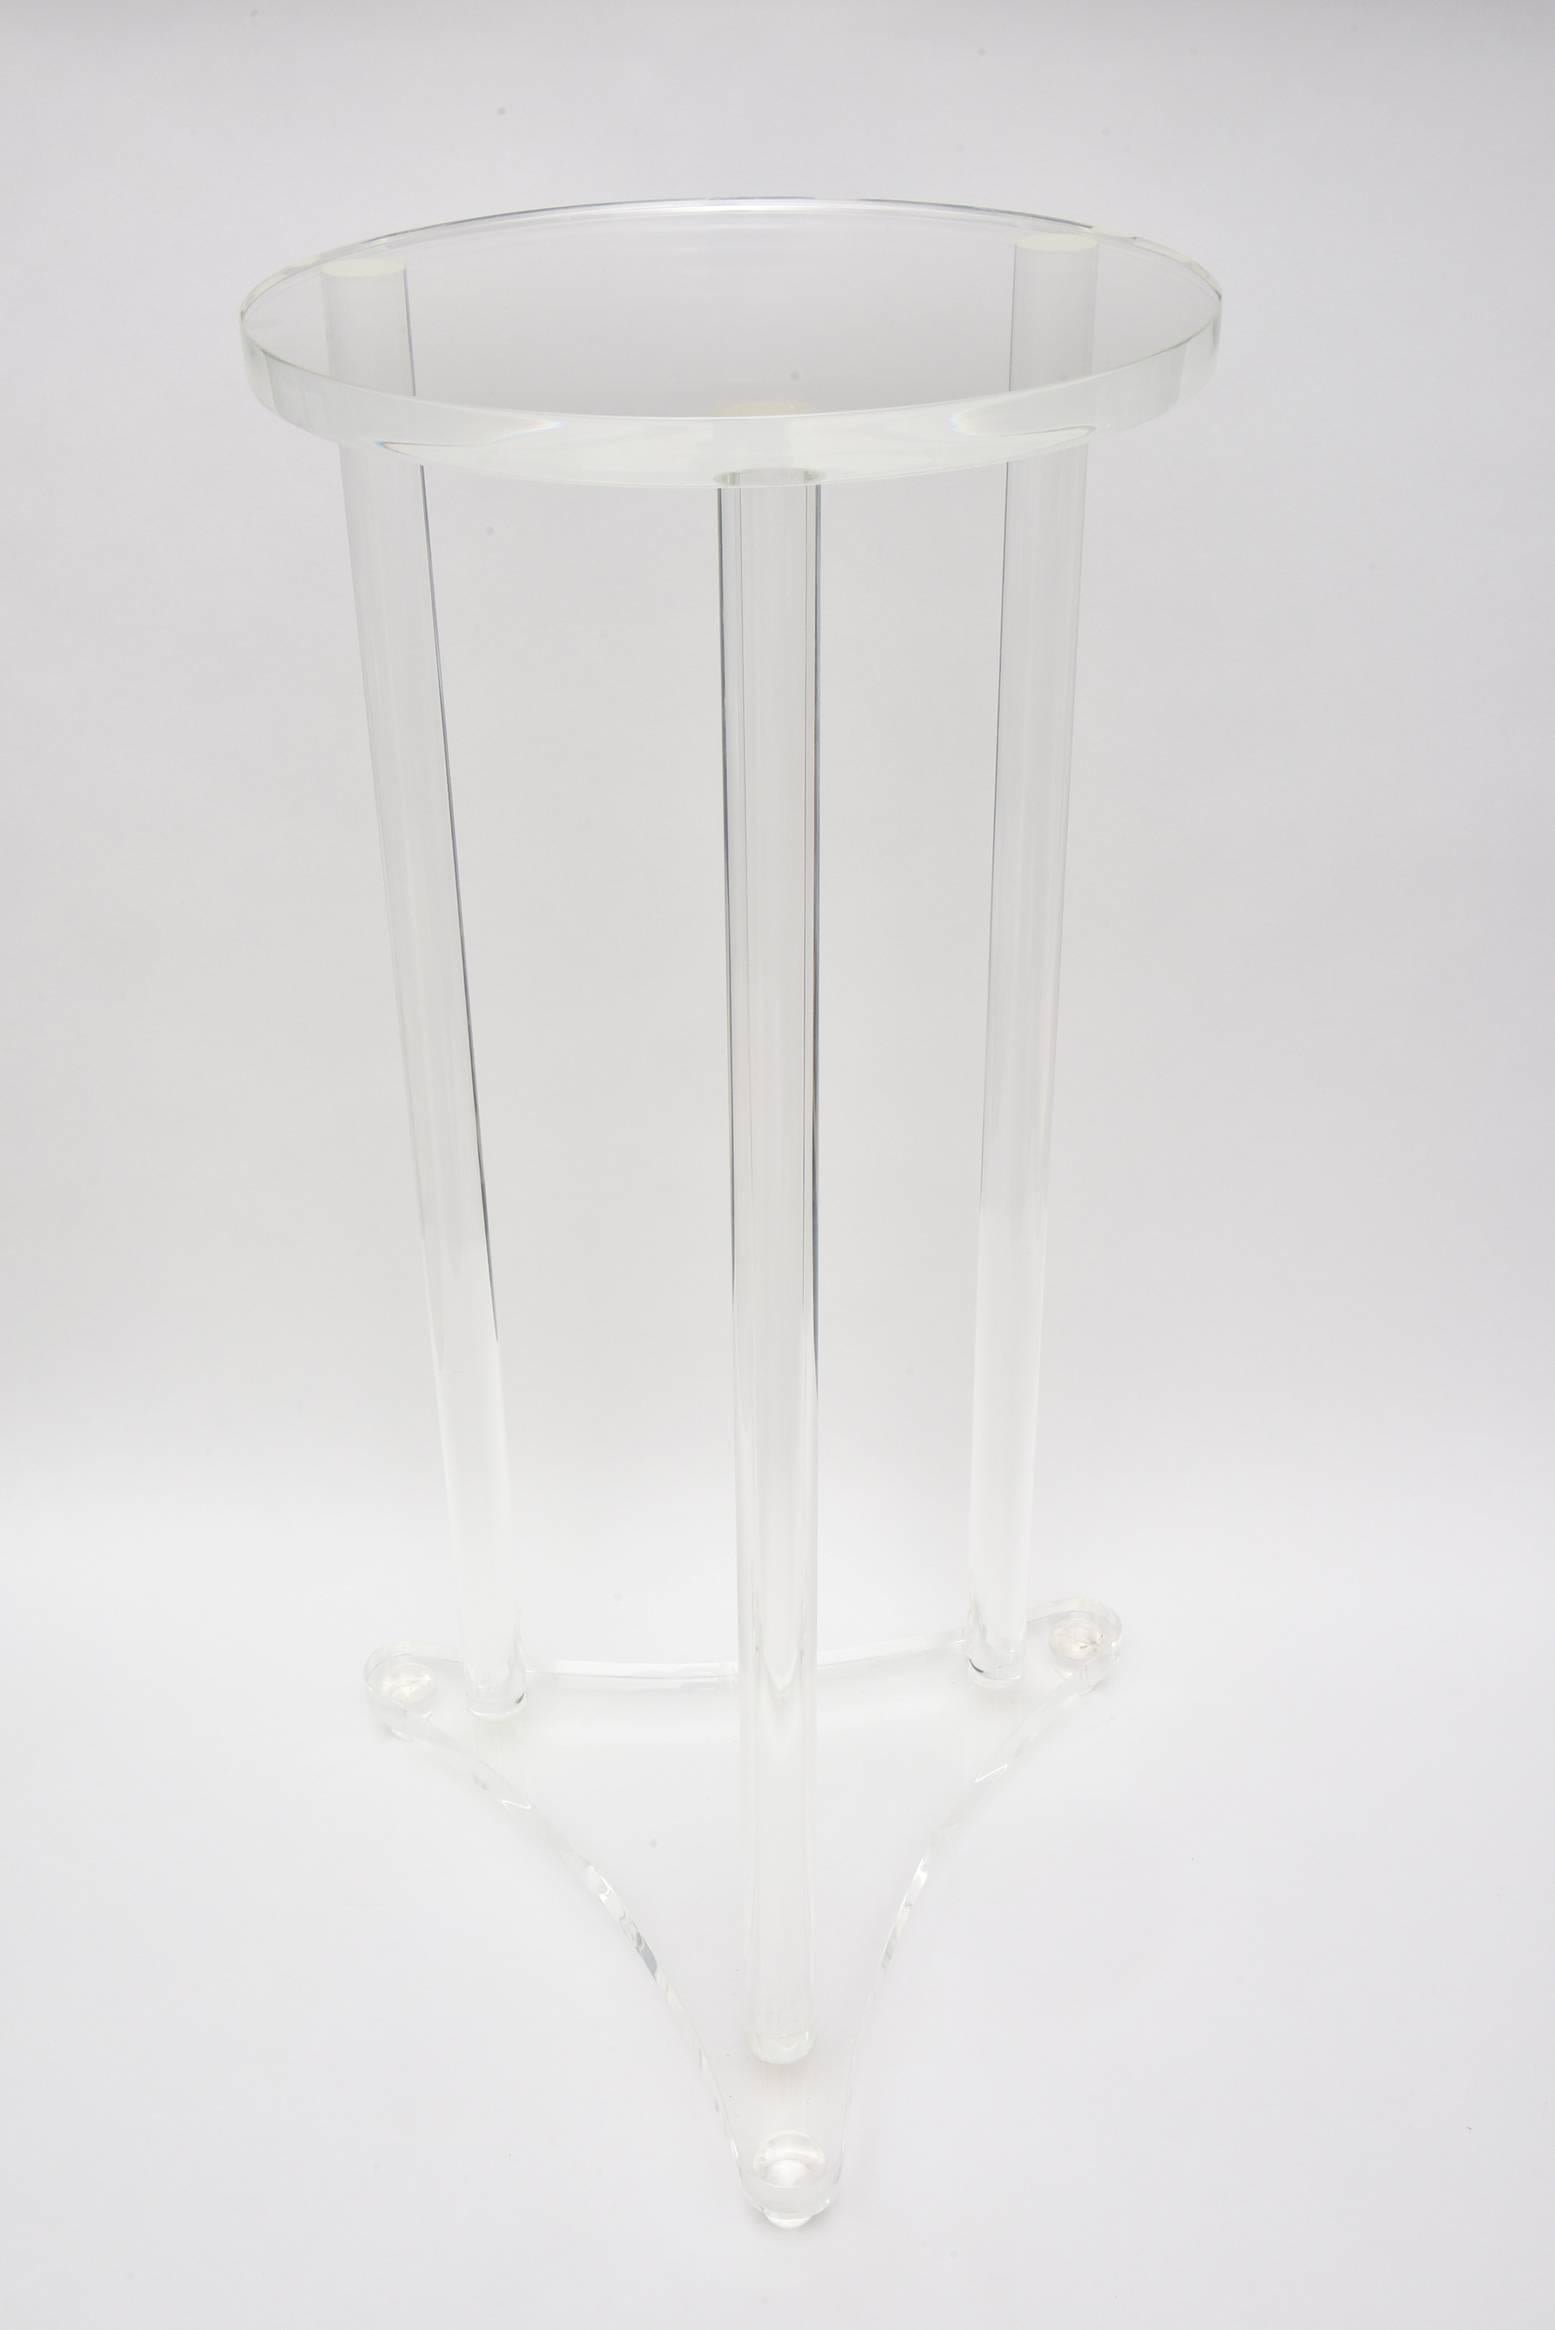 This great size and great condition vintage Lucite pedestal stand is perfect for a piece of art or sculpture.
It has three leg poles on a triangle shaped base.
It has good weight and is from the 1970s. Very good condition.
The diameter of the